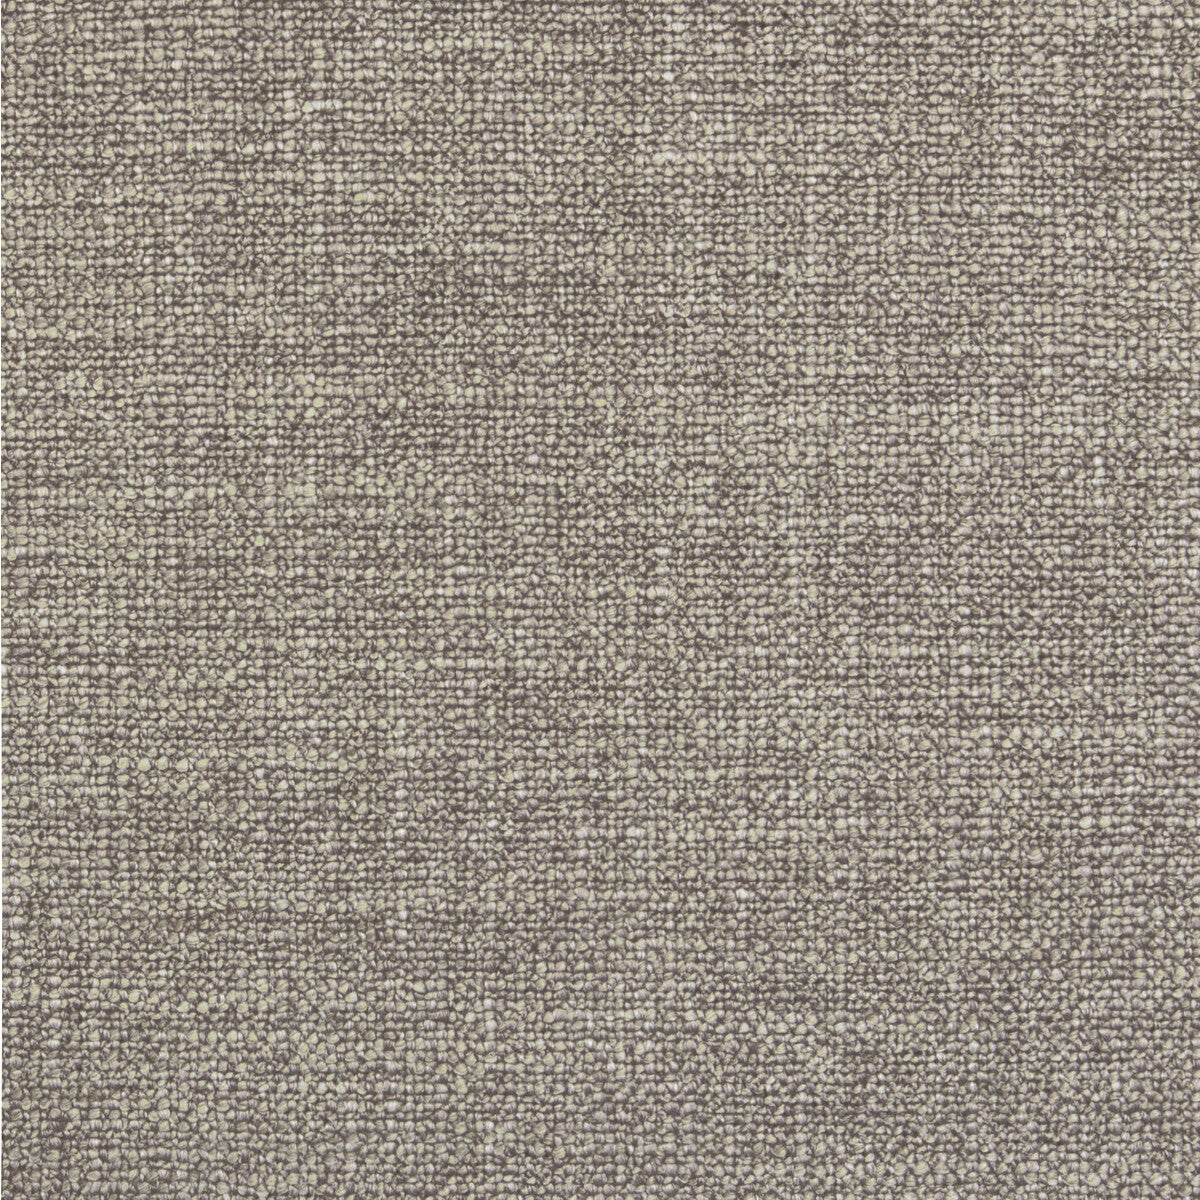 Hapi Texture fabric in pinkberry color - pattern 35872.17.0 - by Kravet Couture in the Windsor Smith Naila collection